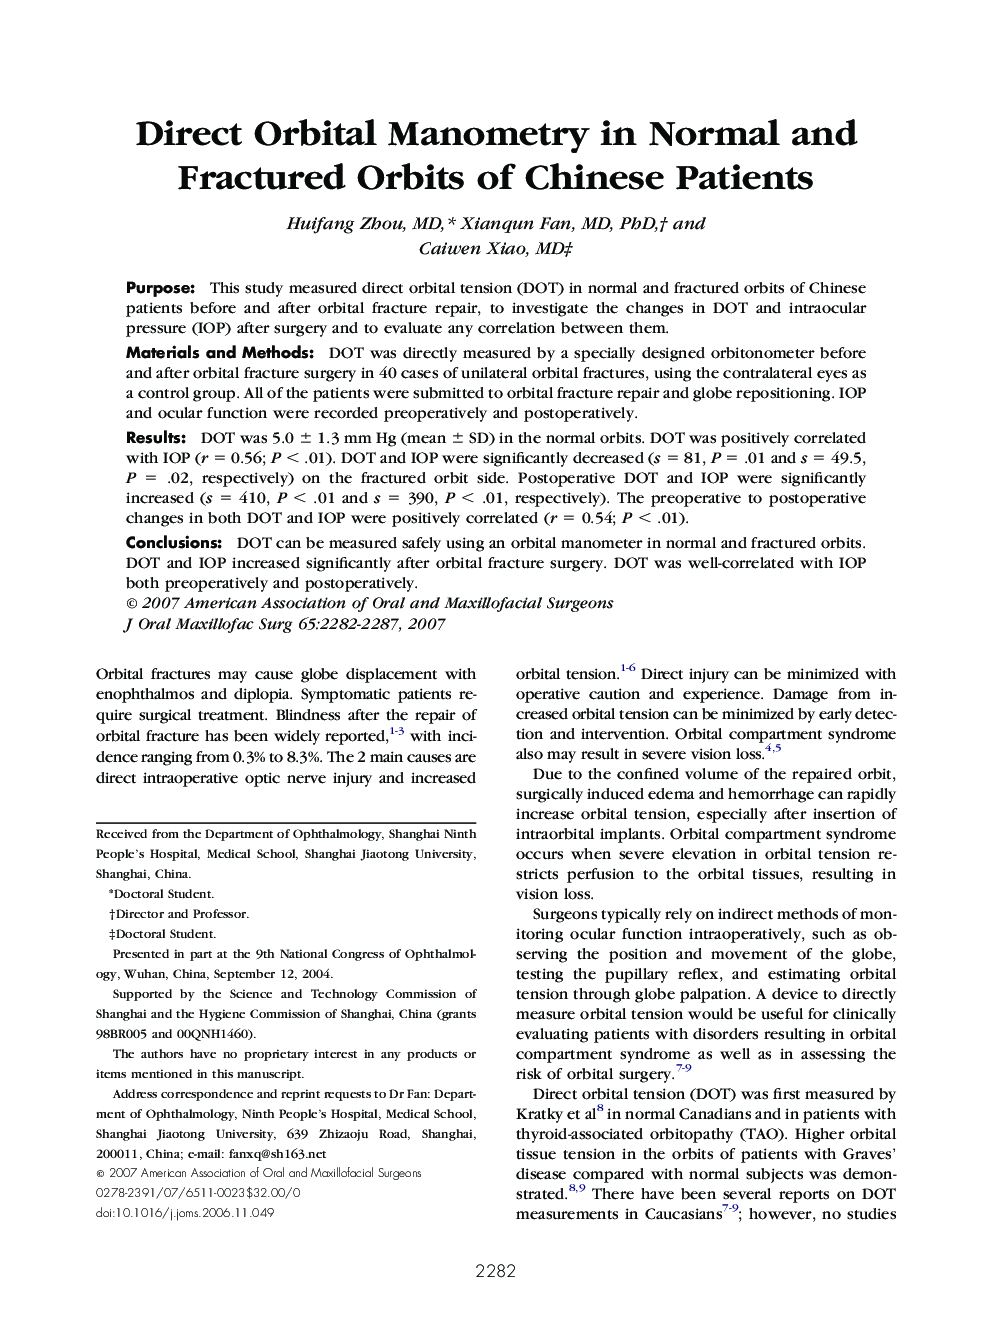 Direct Orbital Manometry in Normal and Fractured Orbits of Chinese Patients